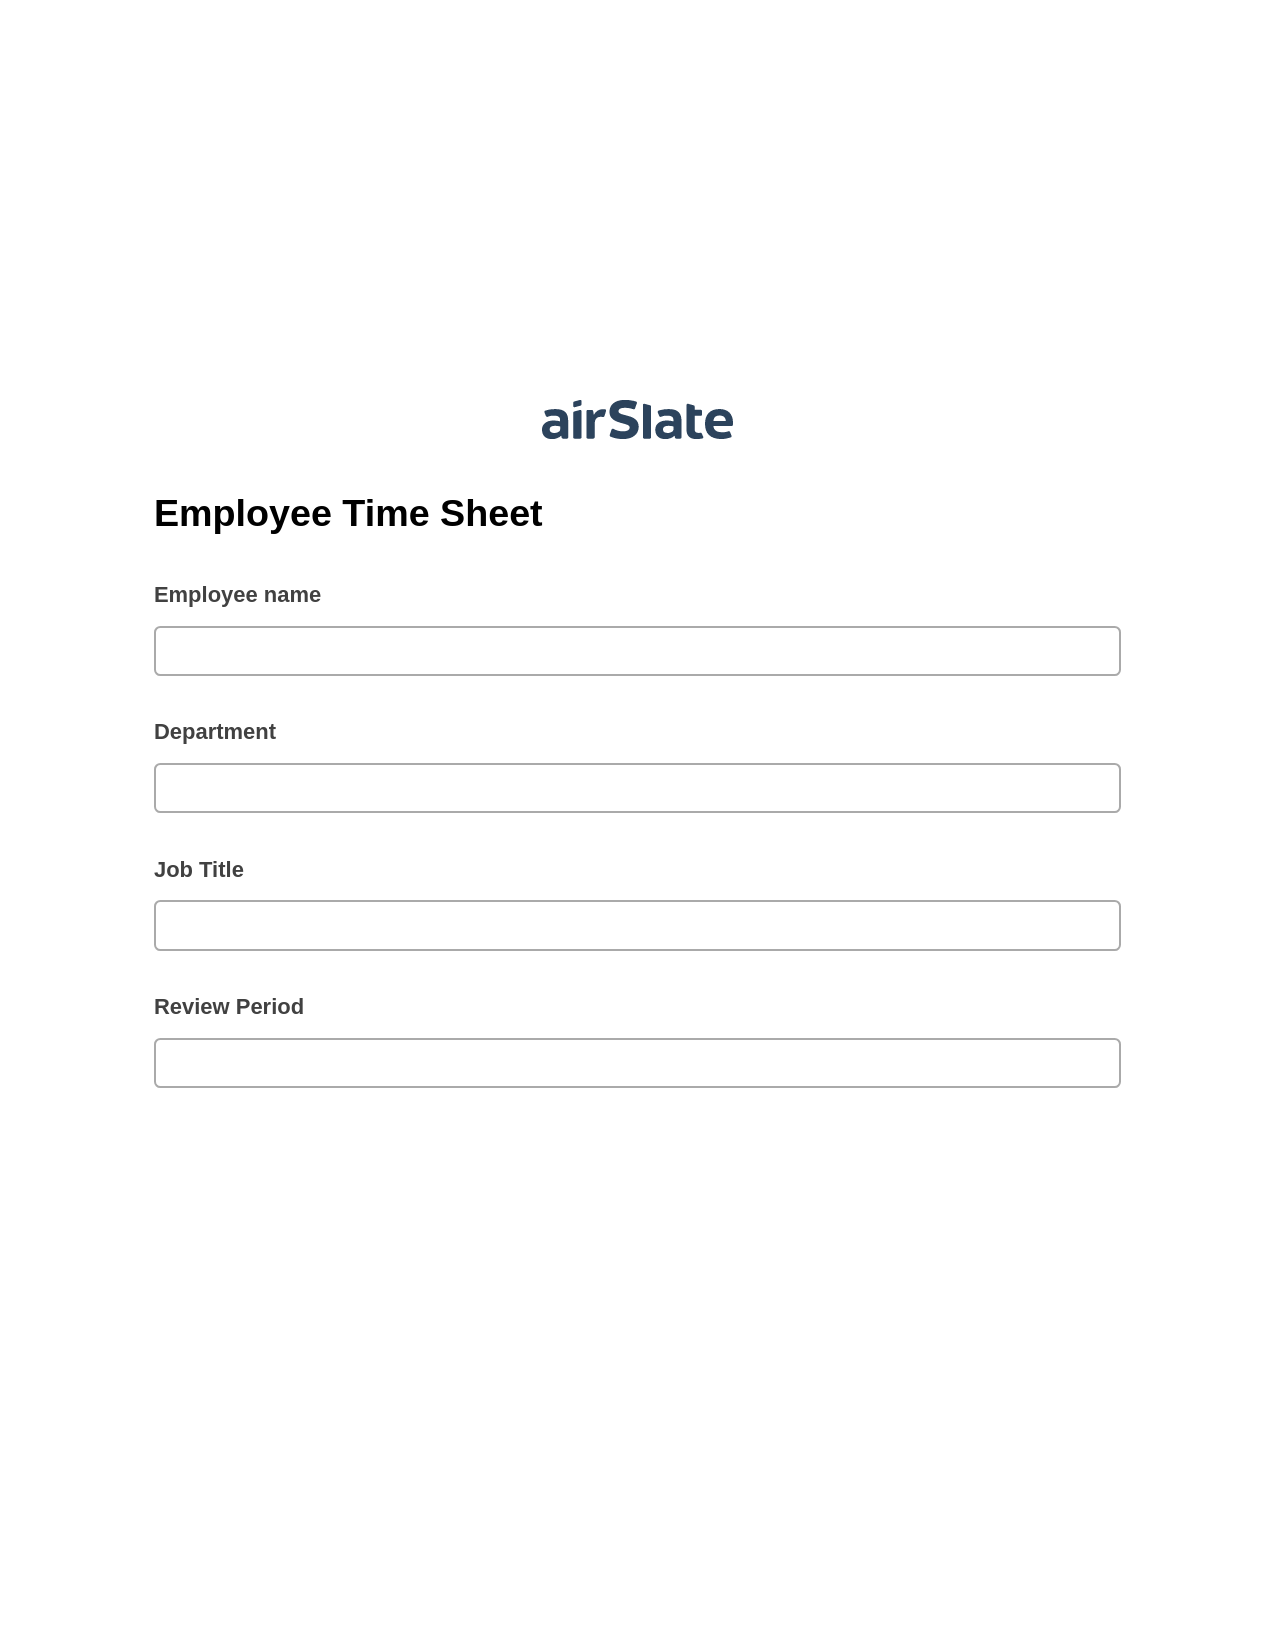 Multirole Employee Time Sheet Pre-fill from Salesforce Records with SOQL Bot, Remove Tags From Slate Bot, Archive to Dropbox Bot